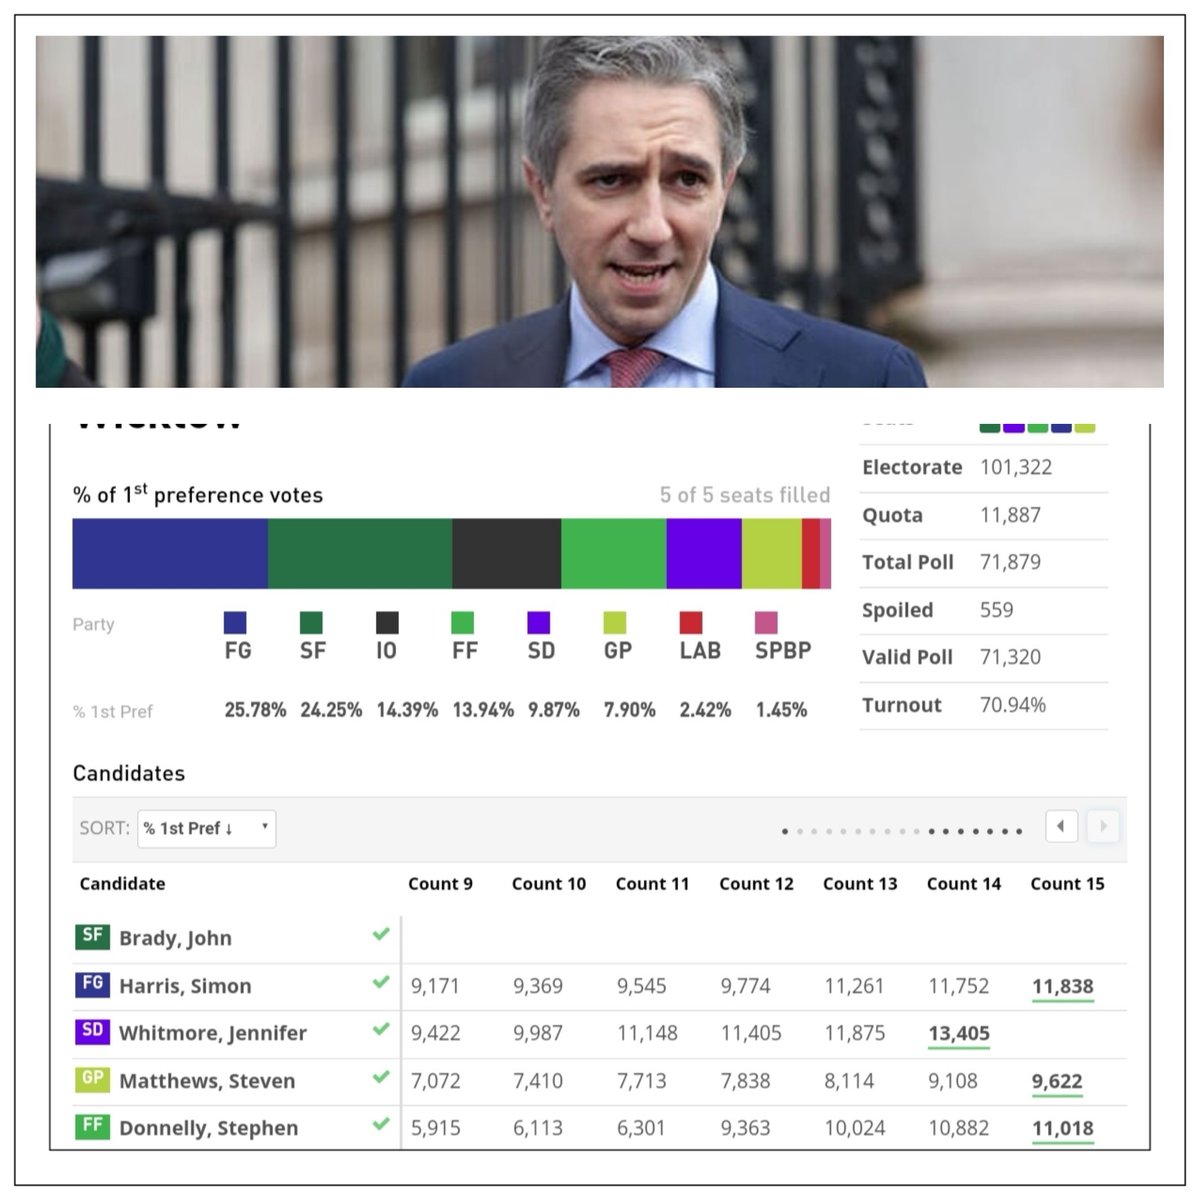 Simon Harris has no popular mandate, in GE2020 he didn't even get enough votes in his own constituency to get him over the line on the 15th count, he was deemed elected as the nearest to the quota, simply to fill the final seat